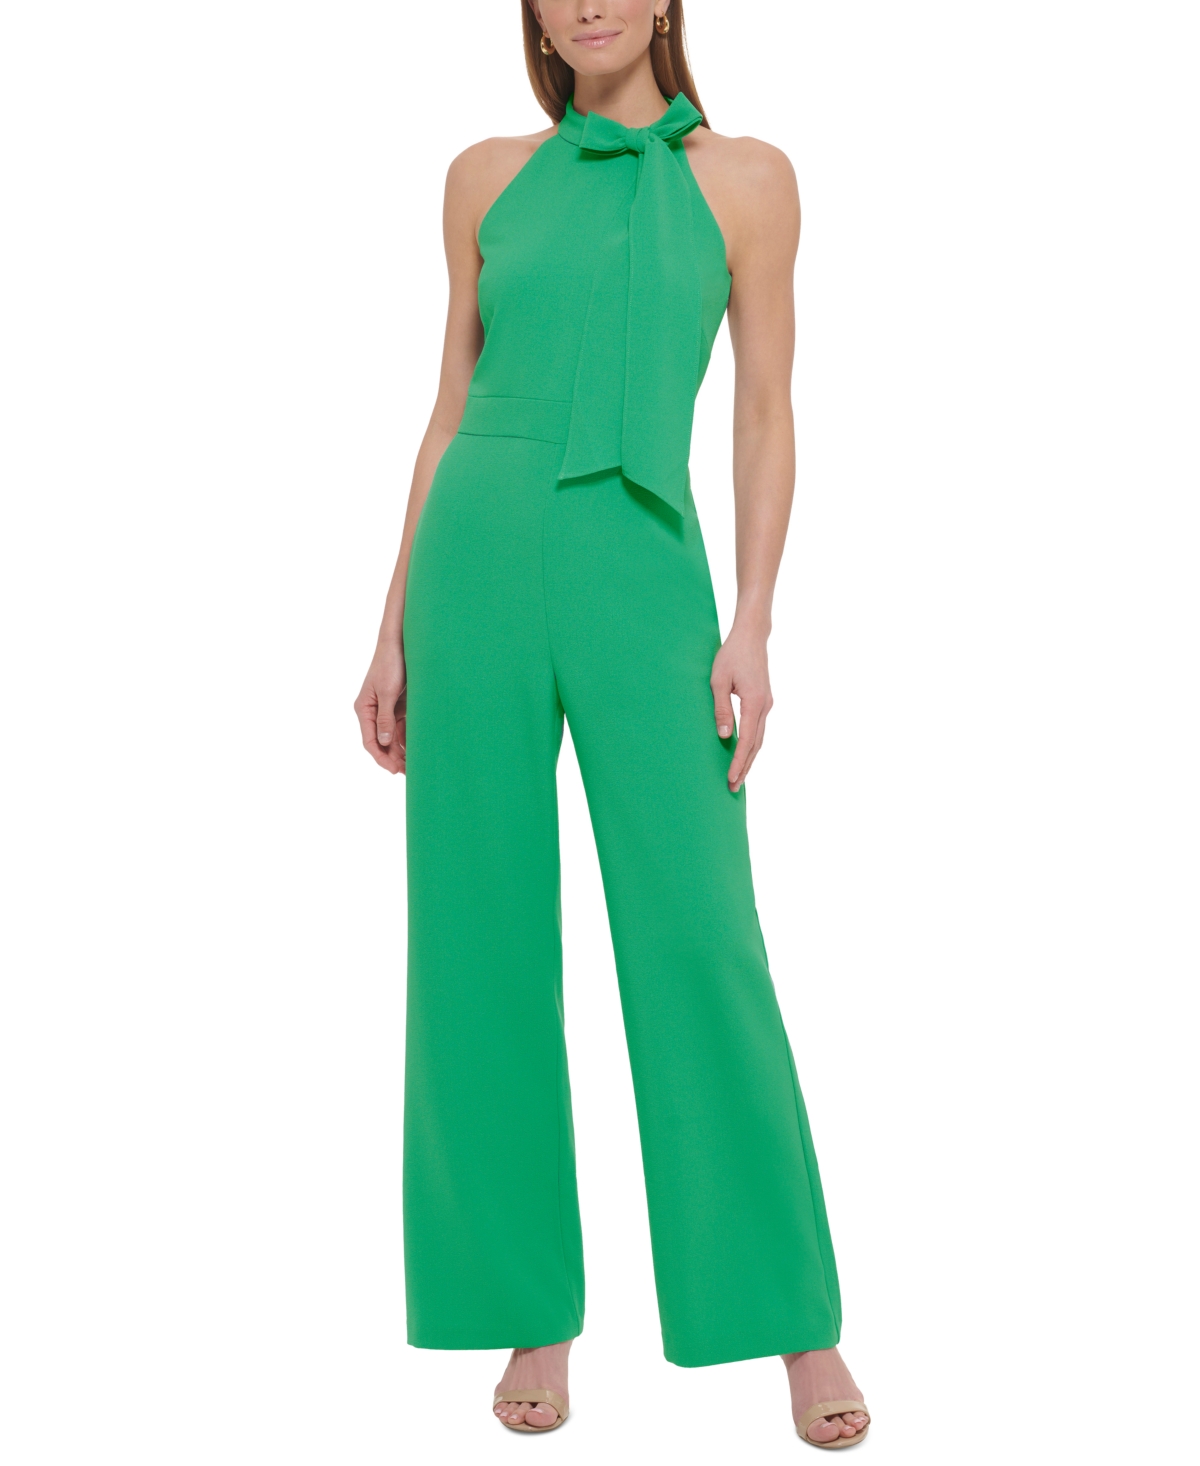 Vince Camuto Women's Signature Stretch Crepe Bow-neck Halter Jumpsuit In Kelly Green